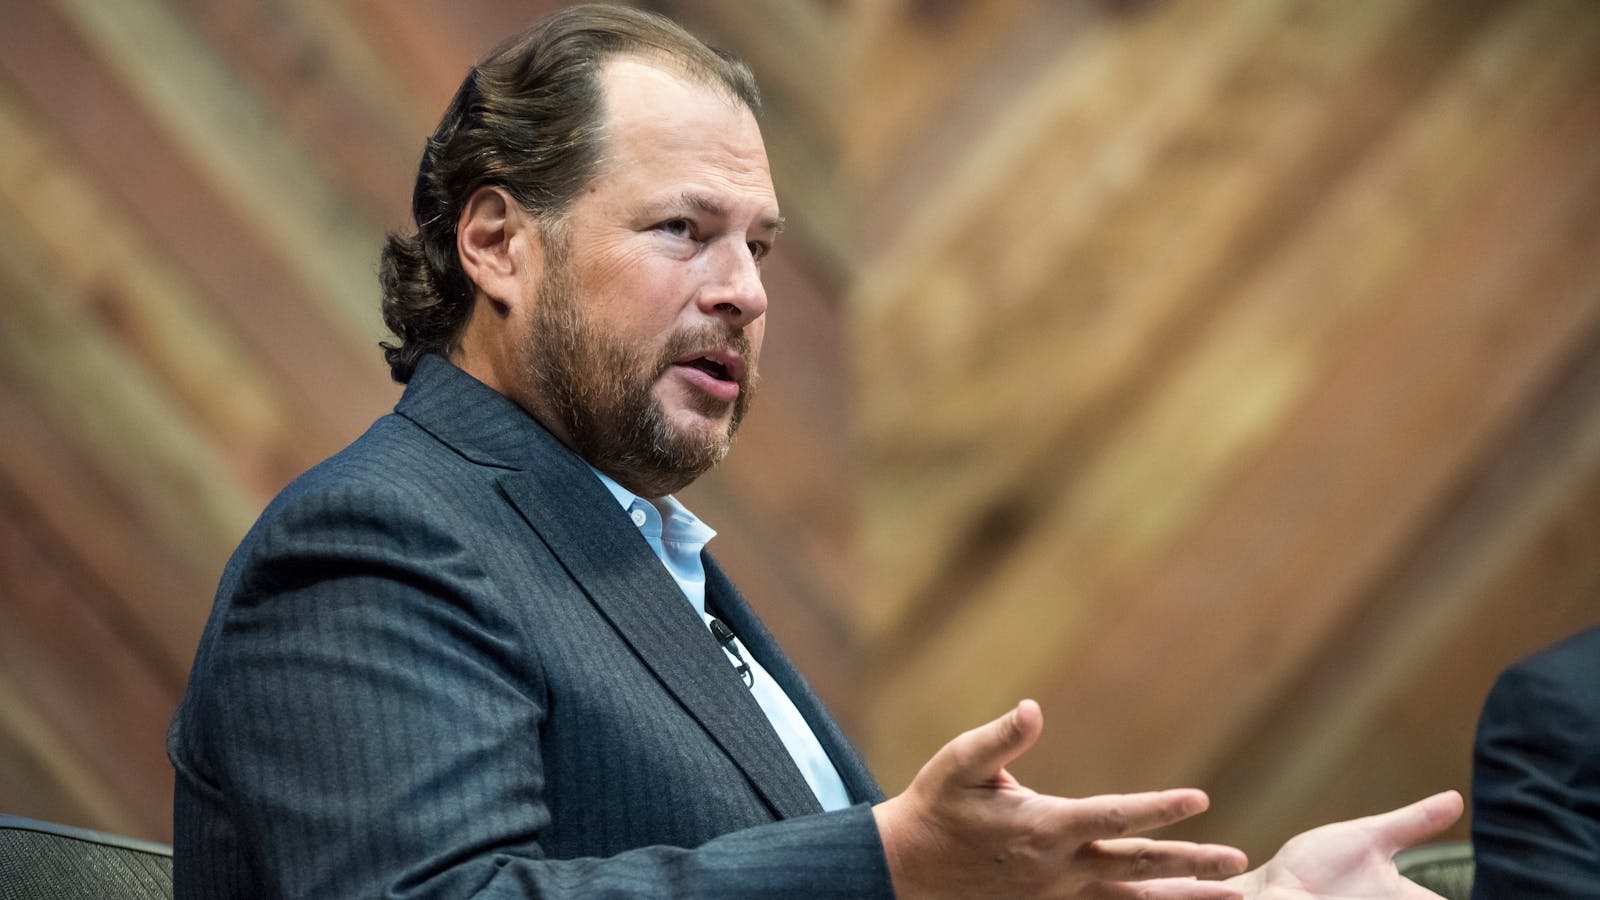 Salesforce CEO Marc Benioff at last year's Dreamforce conference. Photo by Bloomberg.